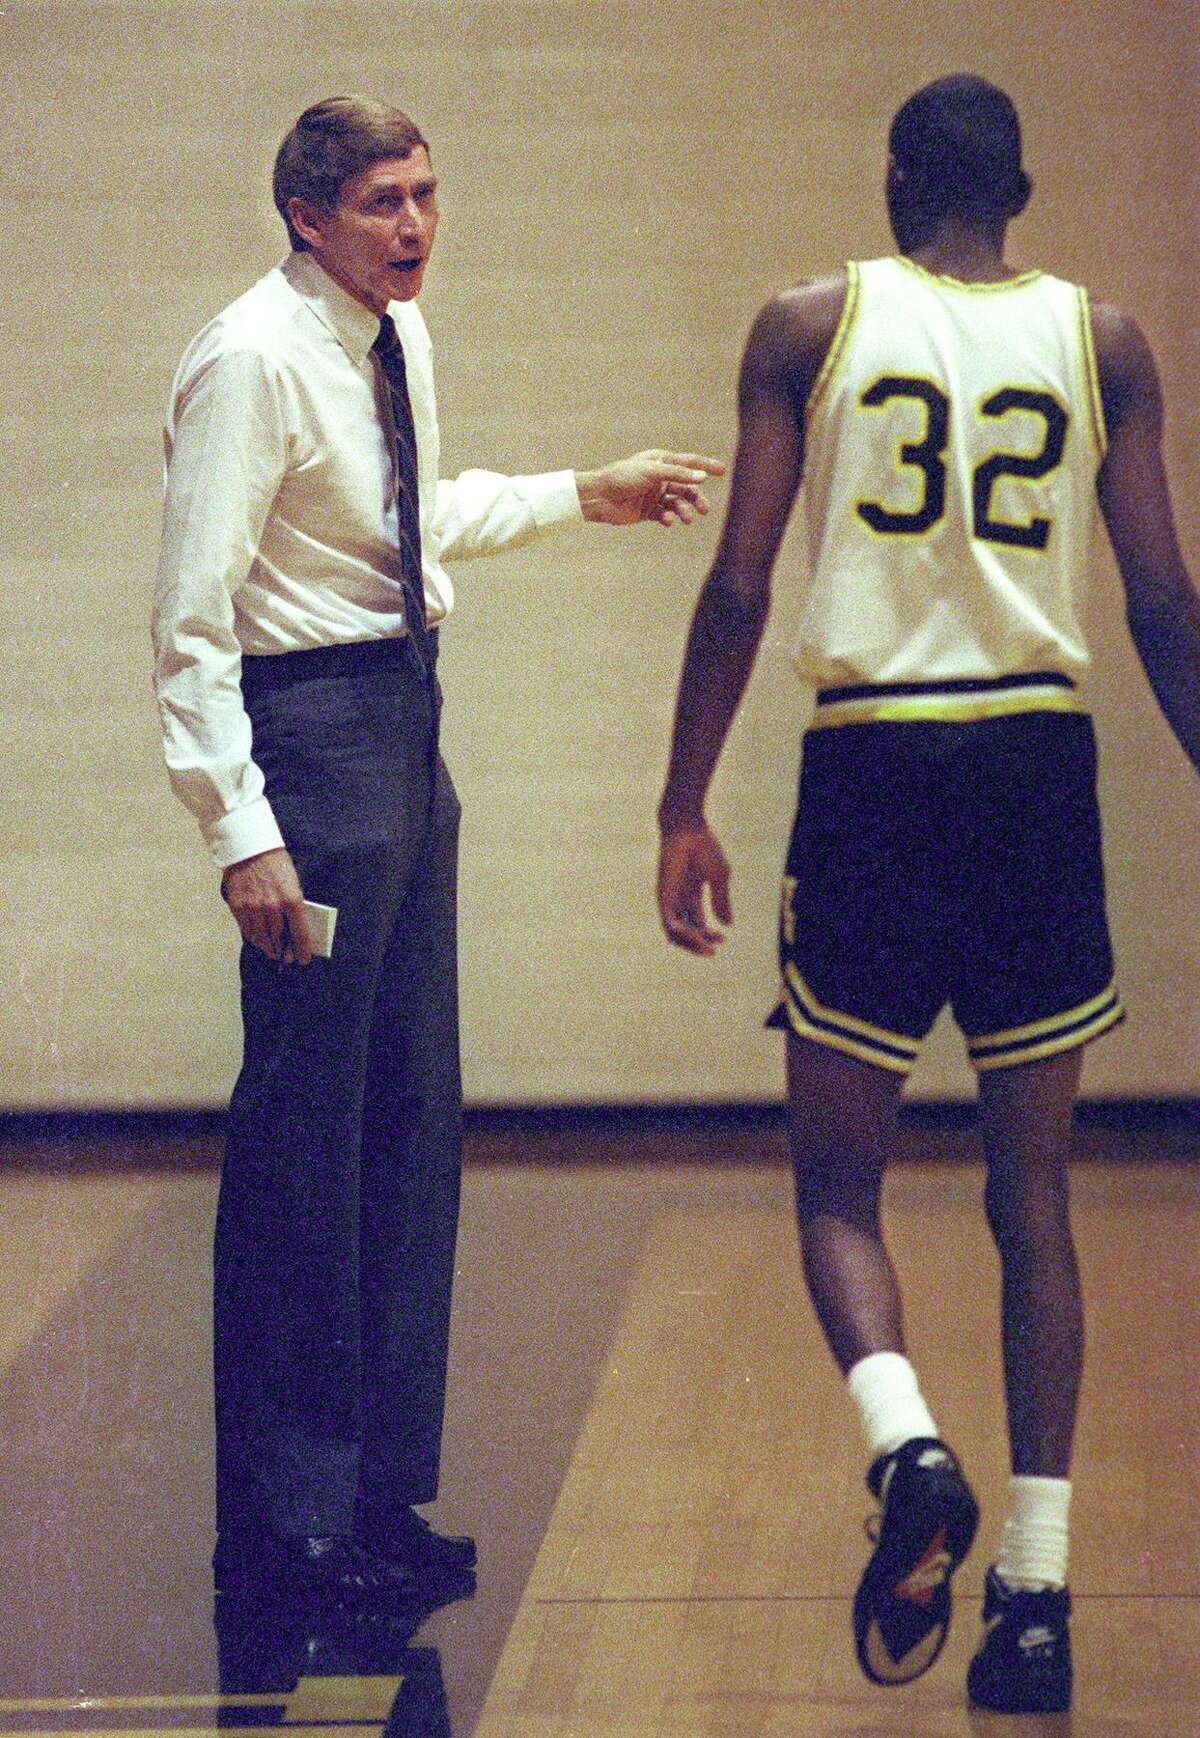 Texas Lutheran basketball coach Jim Shuler advises one of the team members in a 1992 match.